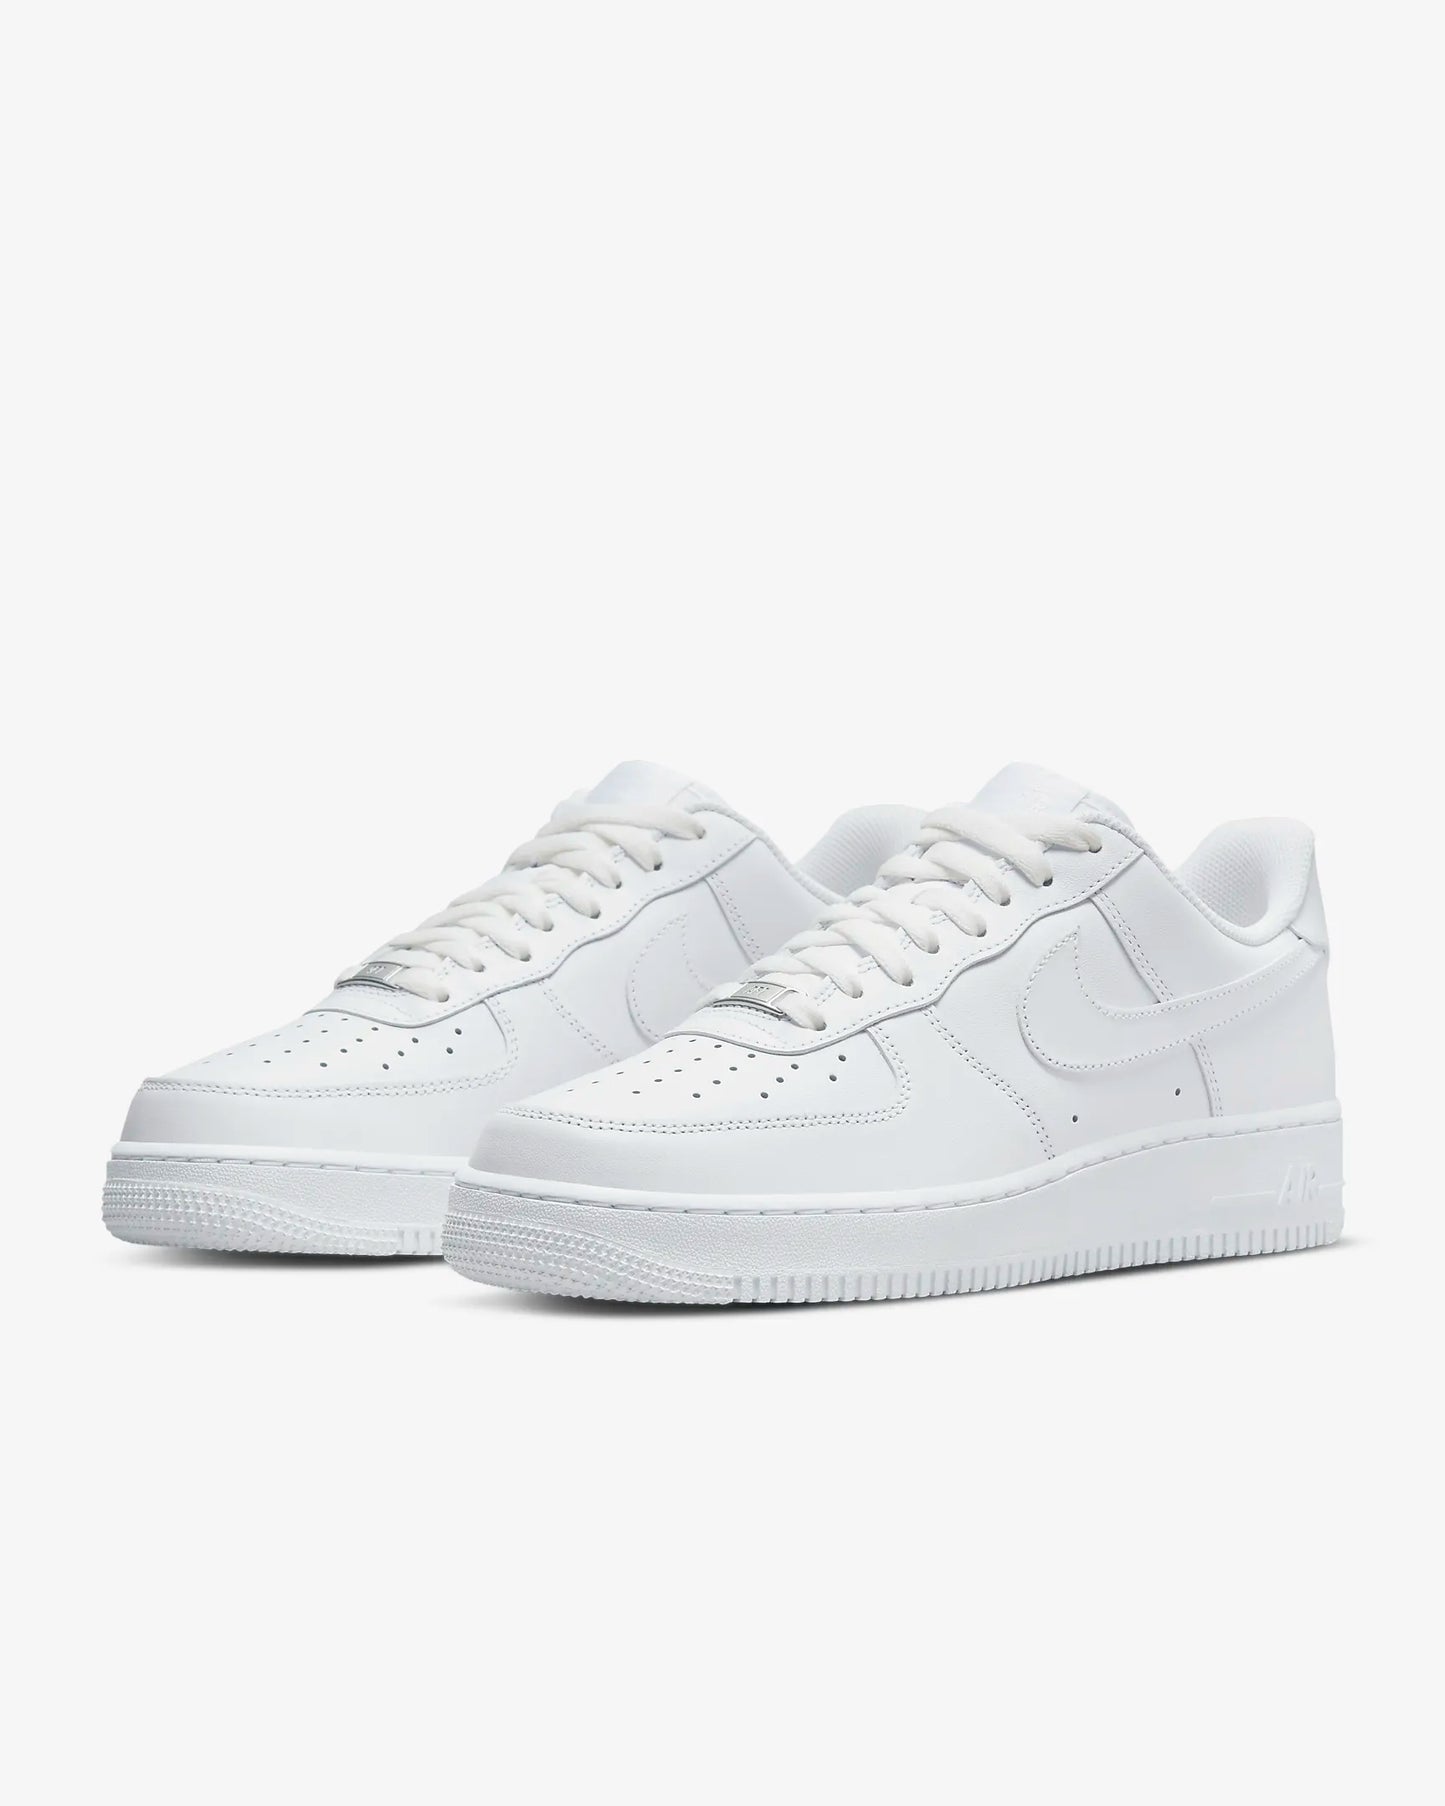 Nike Air Force 1 '07 Low White(Brand New)(Originals) (Pre-Orders Only)